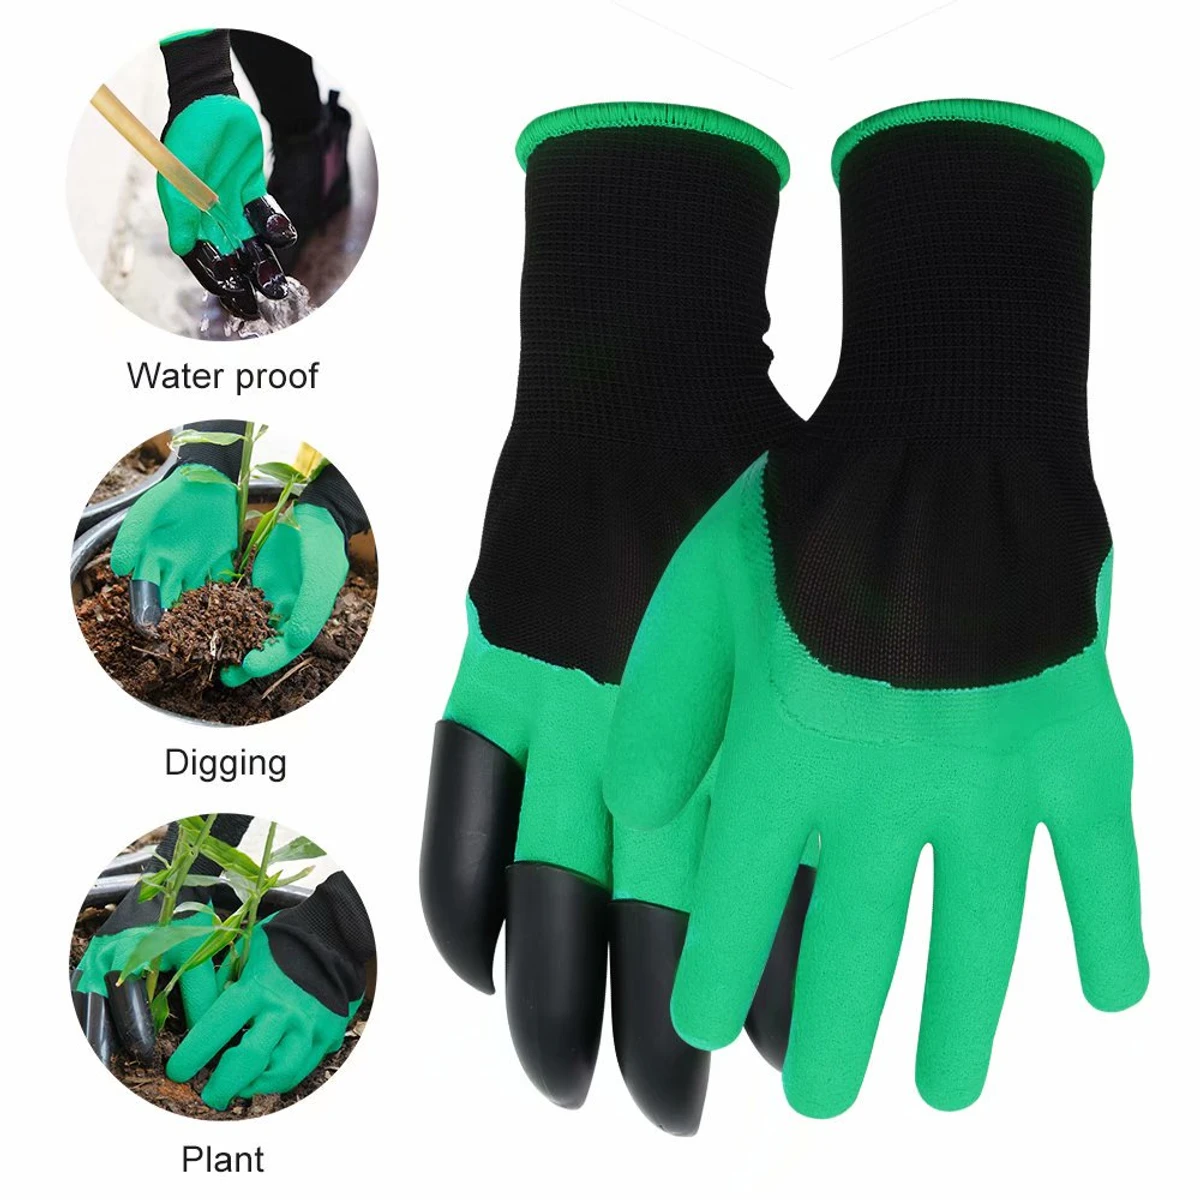 Gardening Gloves with Claws - For Men and Women | Puncture Resistant, Waterproof Safe Garden Gloves for Digging, Pruning & Planting | Gardening Tools 1 Pairs